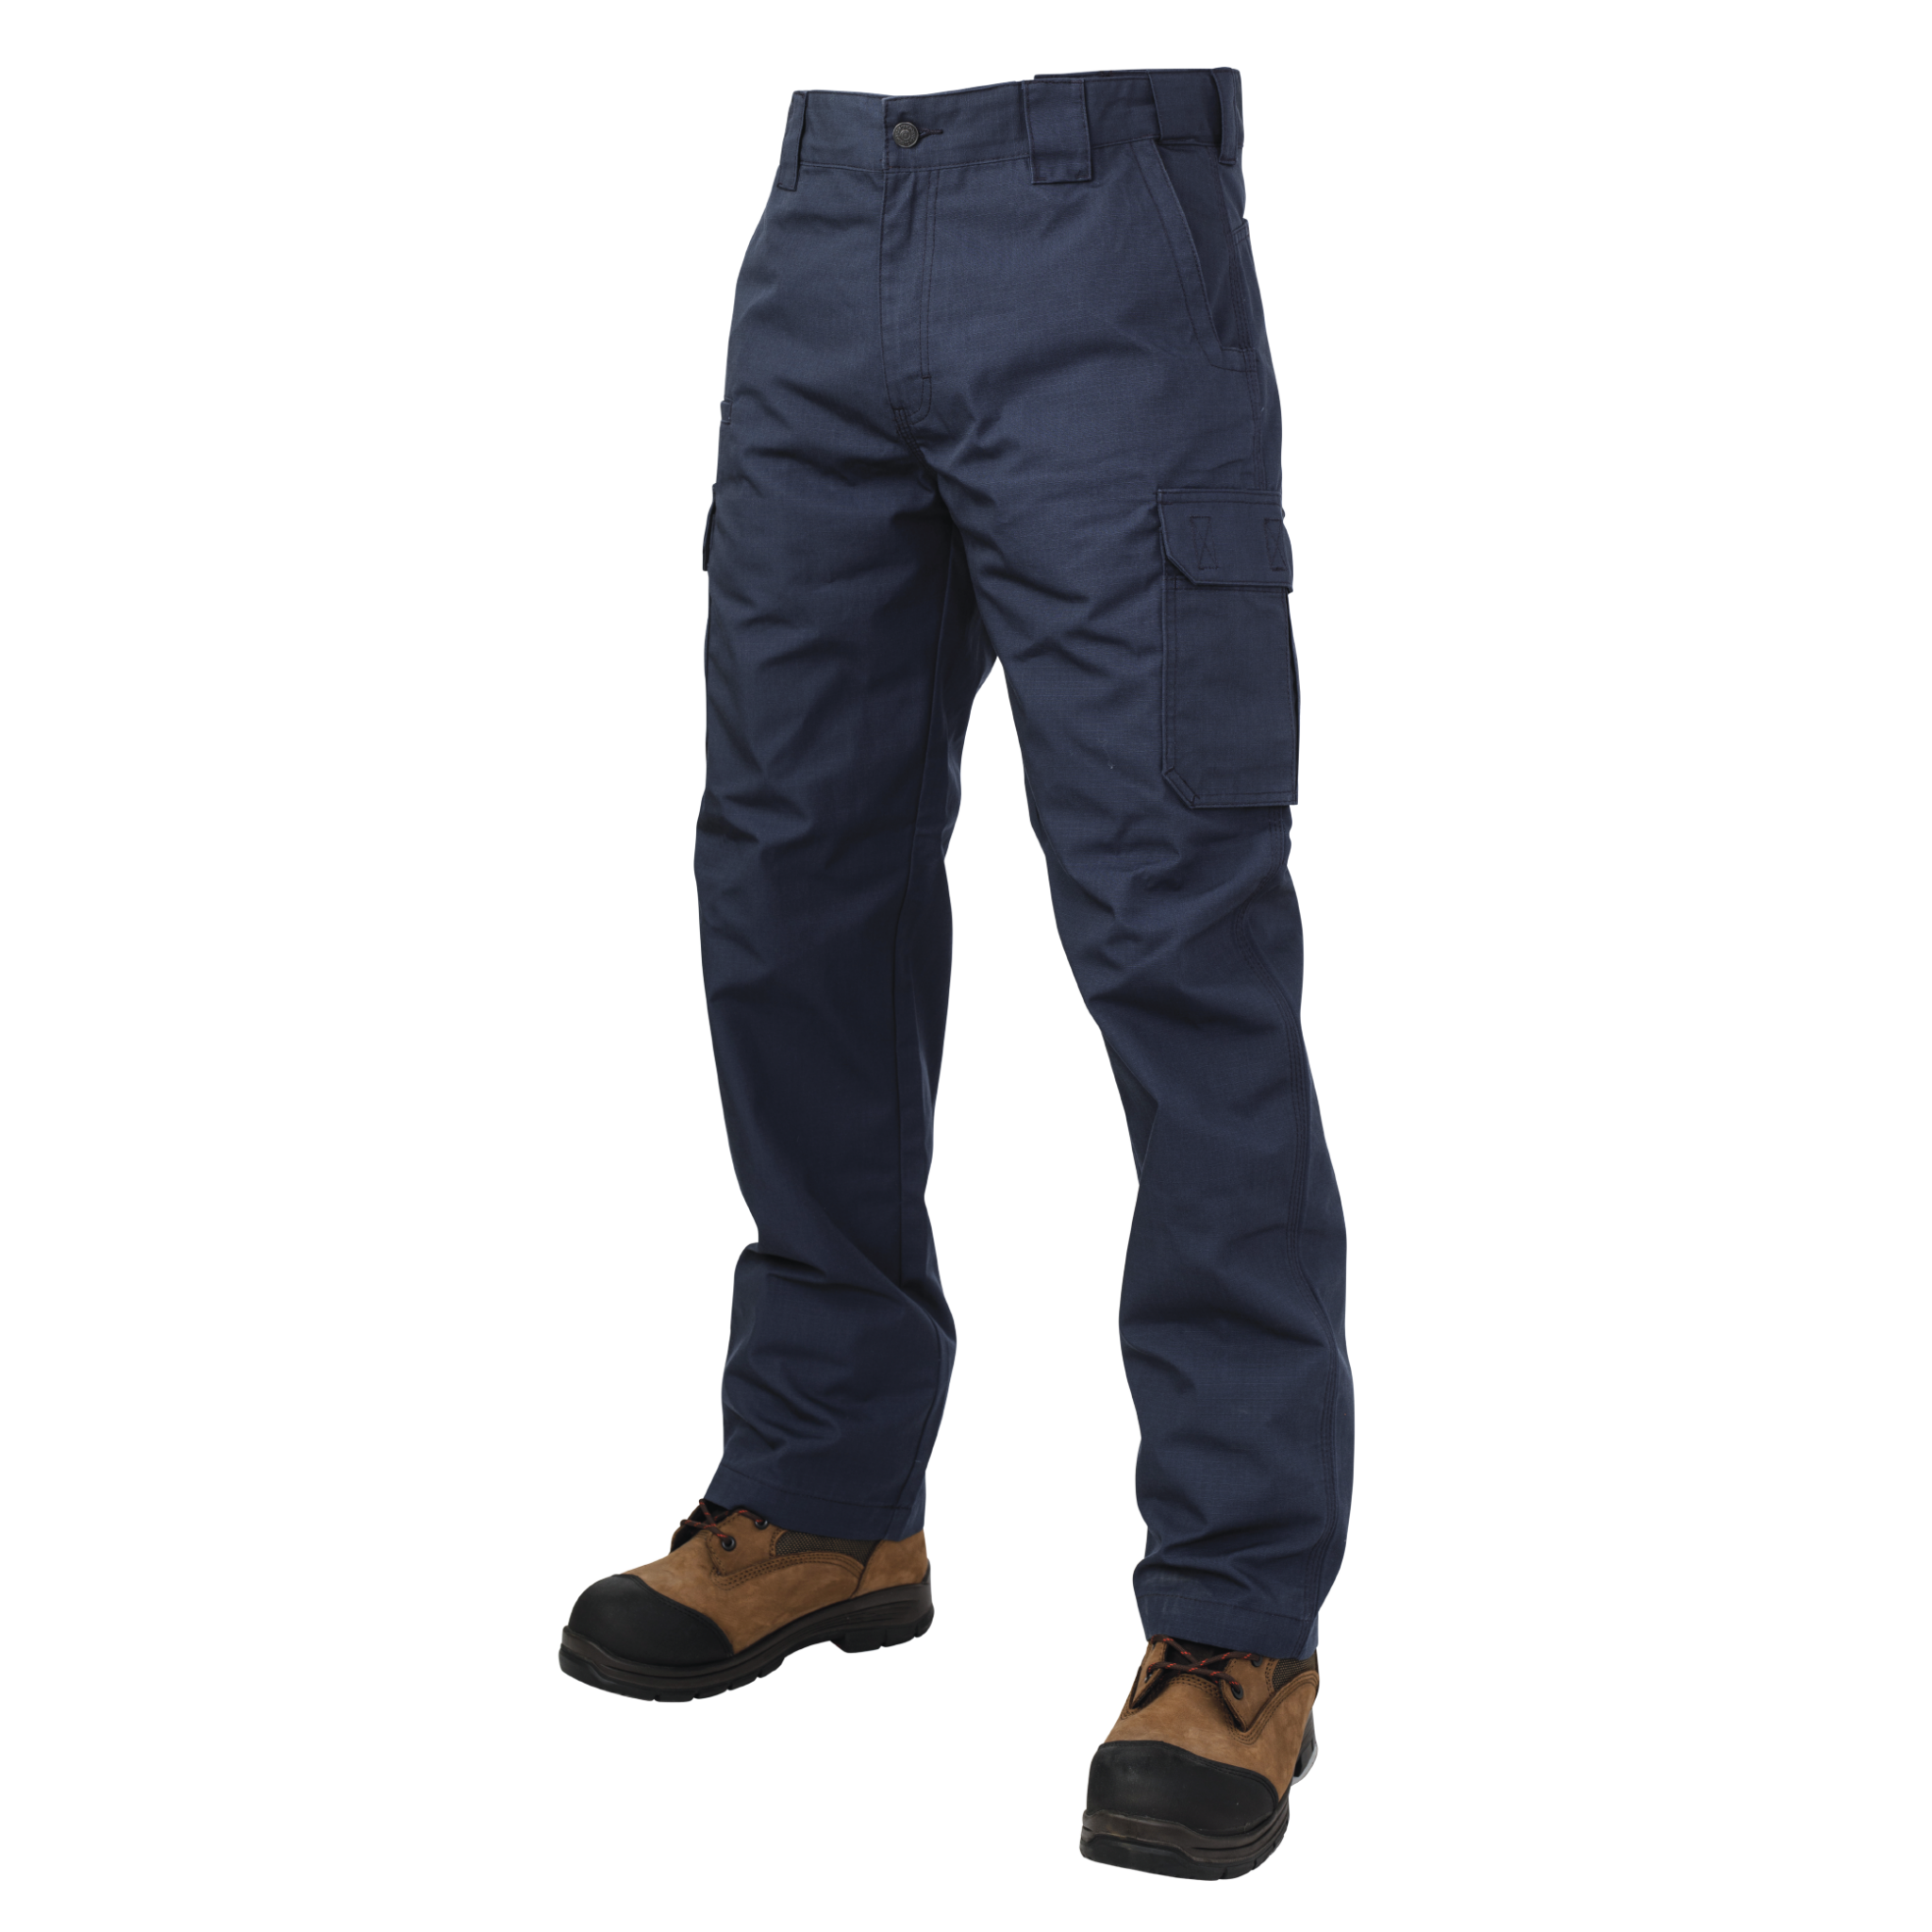 Relaxed Fit Stretch Ripstop Trousers Tactical Series Pants